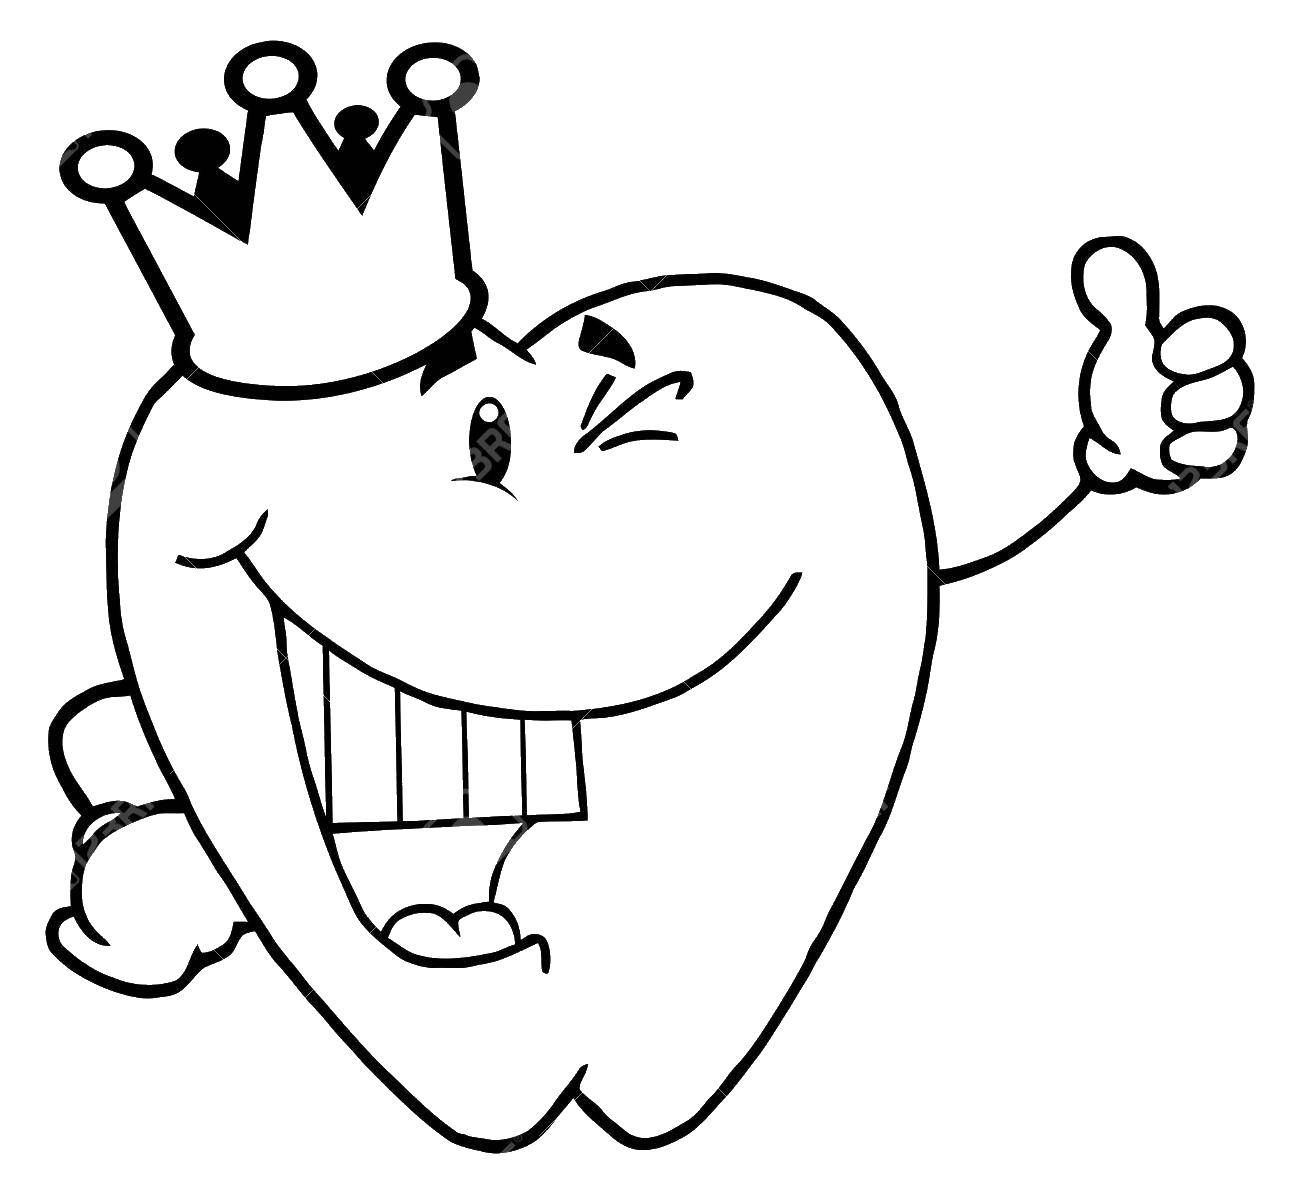 Coloring A healthy and happy tooth. Category The care of teeth. Tags:  The care of teeth.